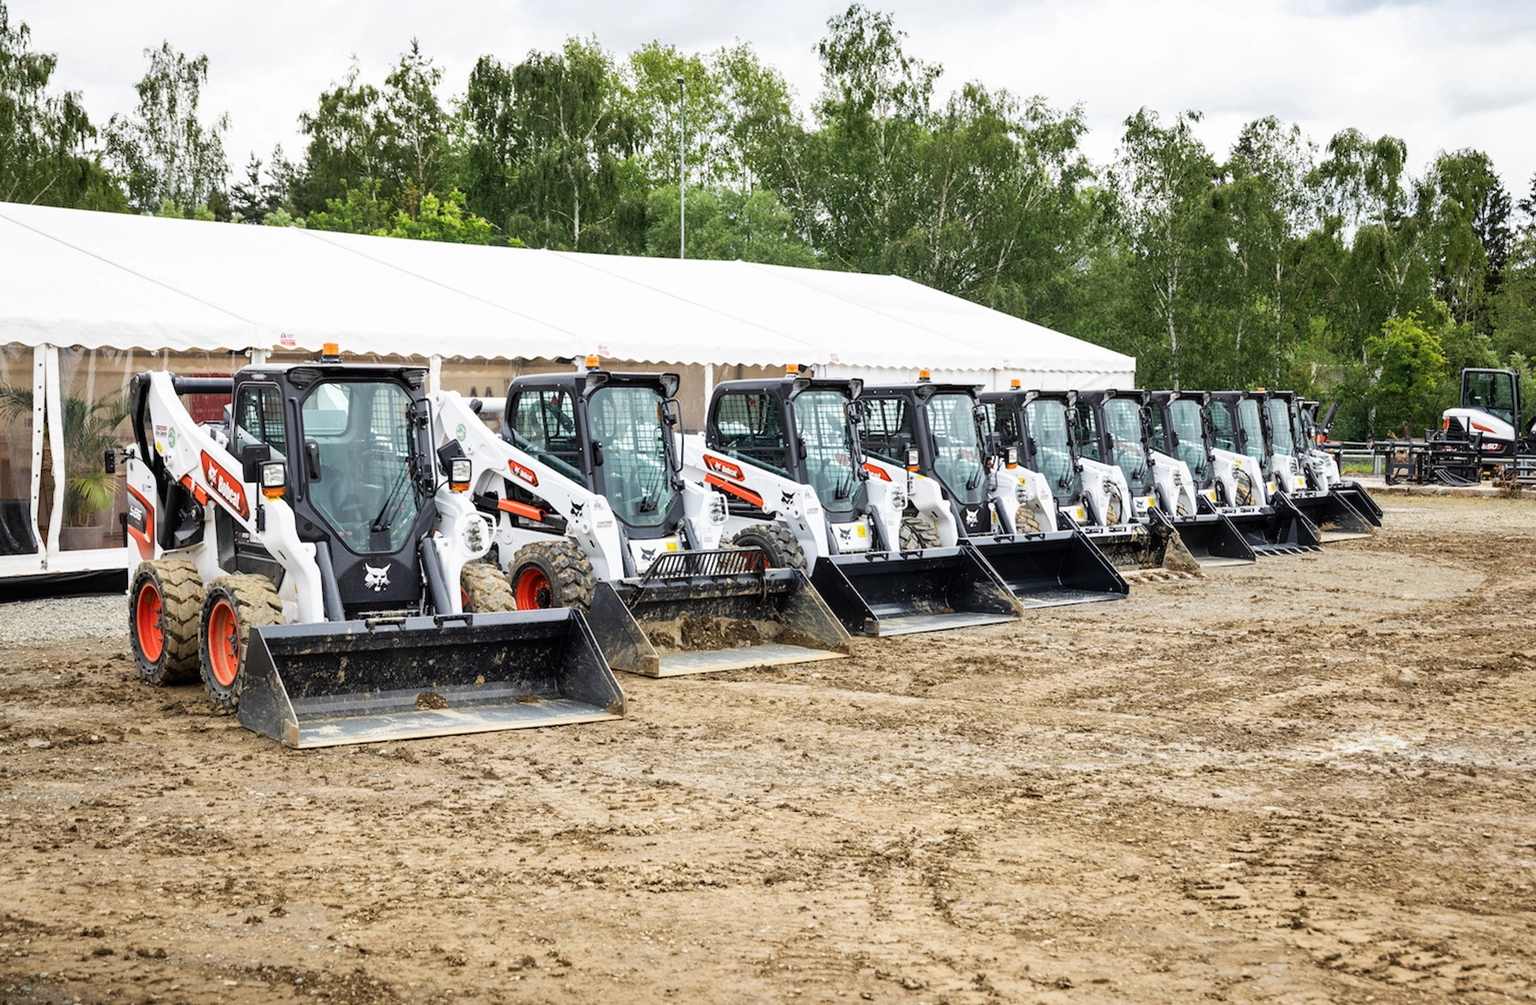 Bobcat Shows Its Latest Products And Innovations At Demo Days